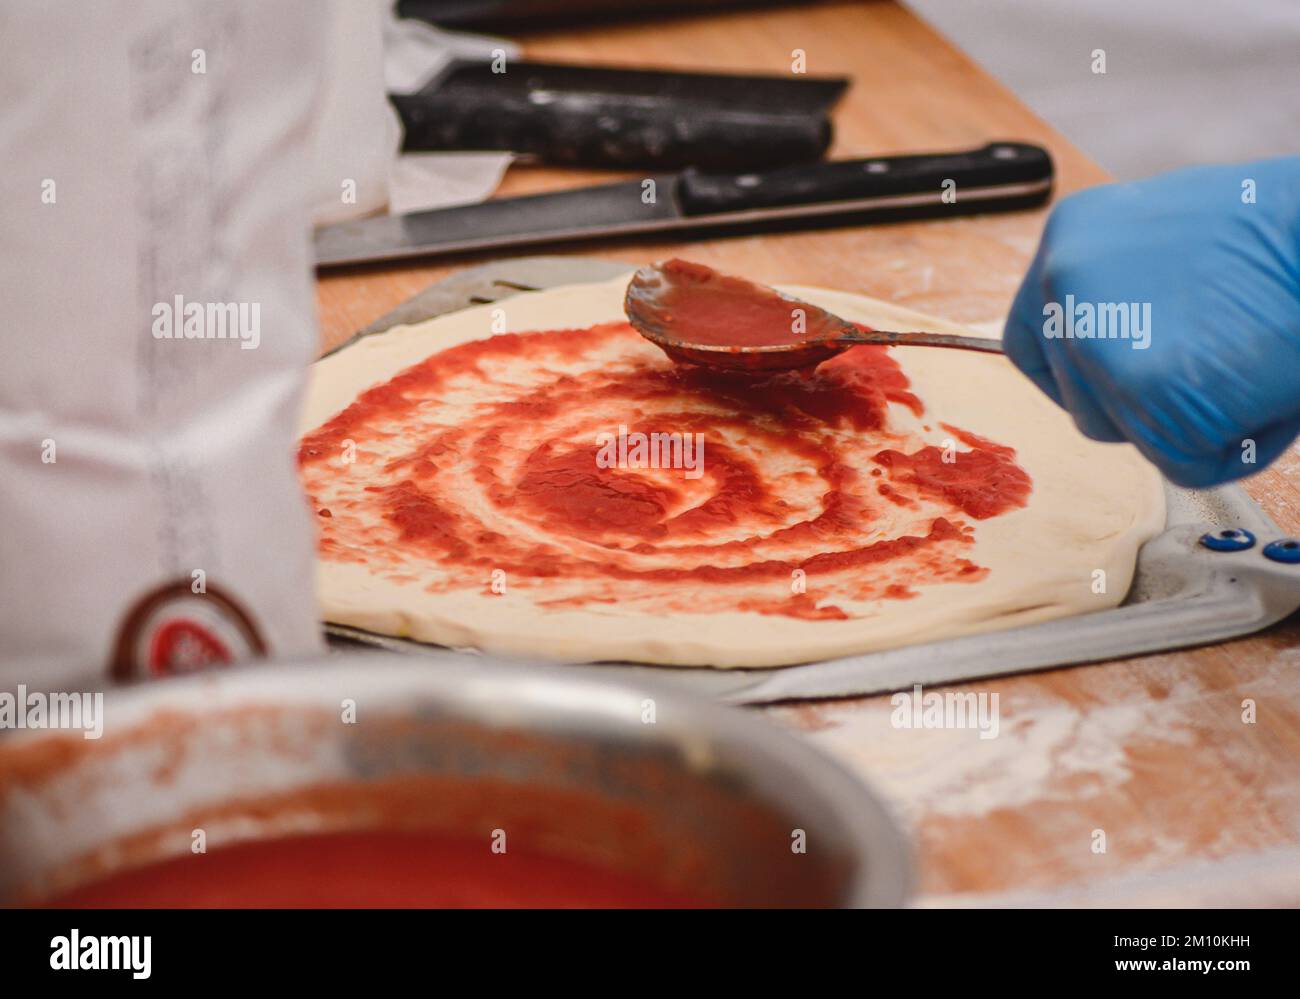 Adding tomato sauce with a spoon on pizza dough on a shovel on a wooden board, close up Stock Photo